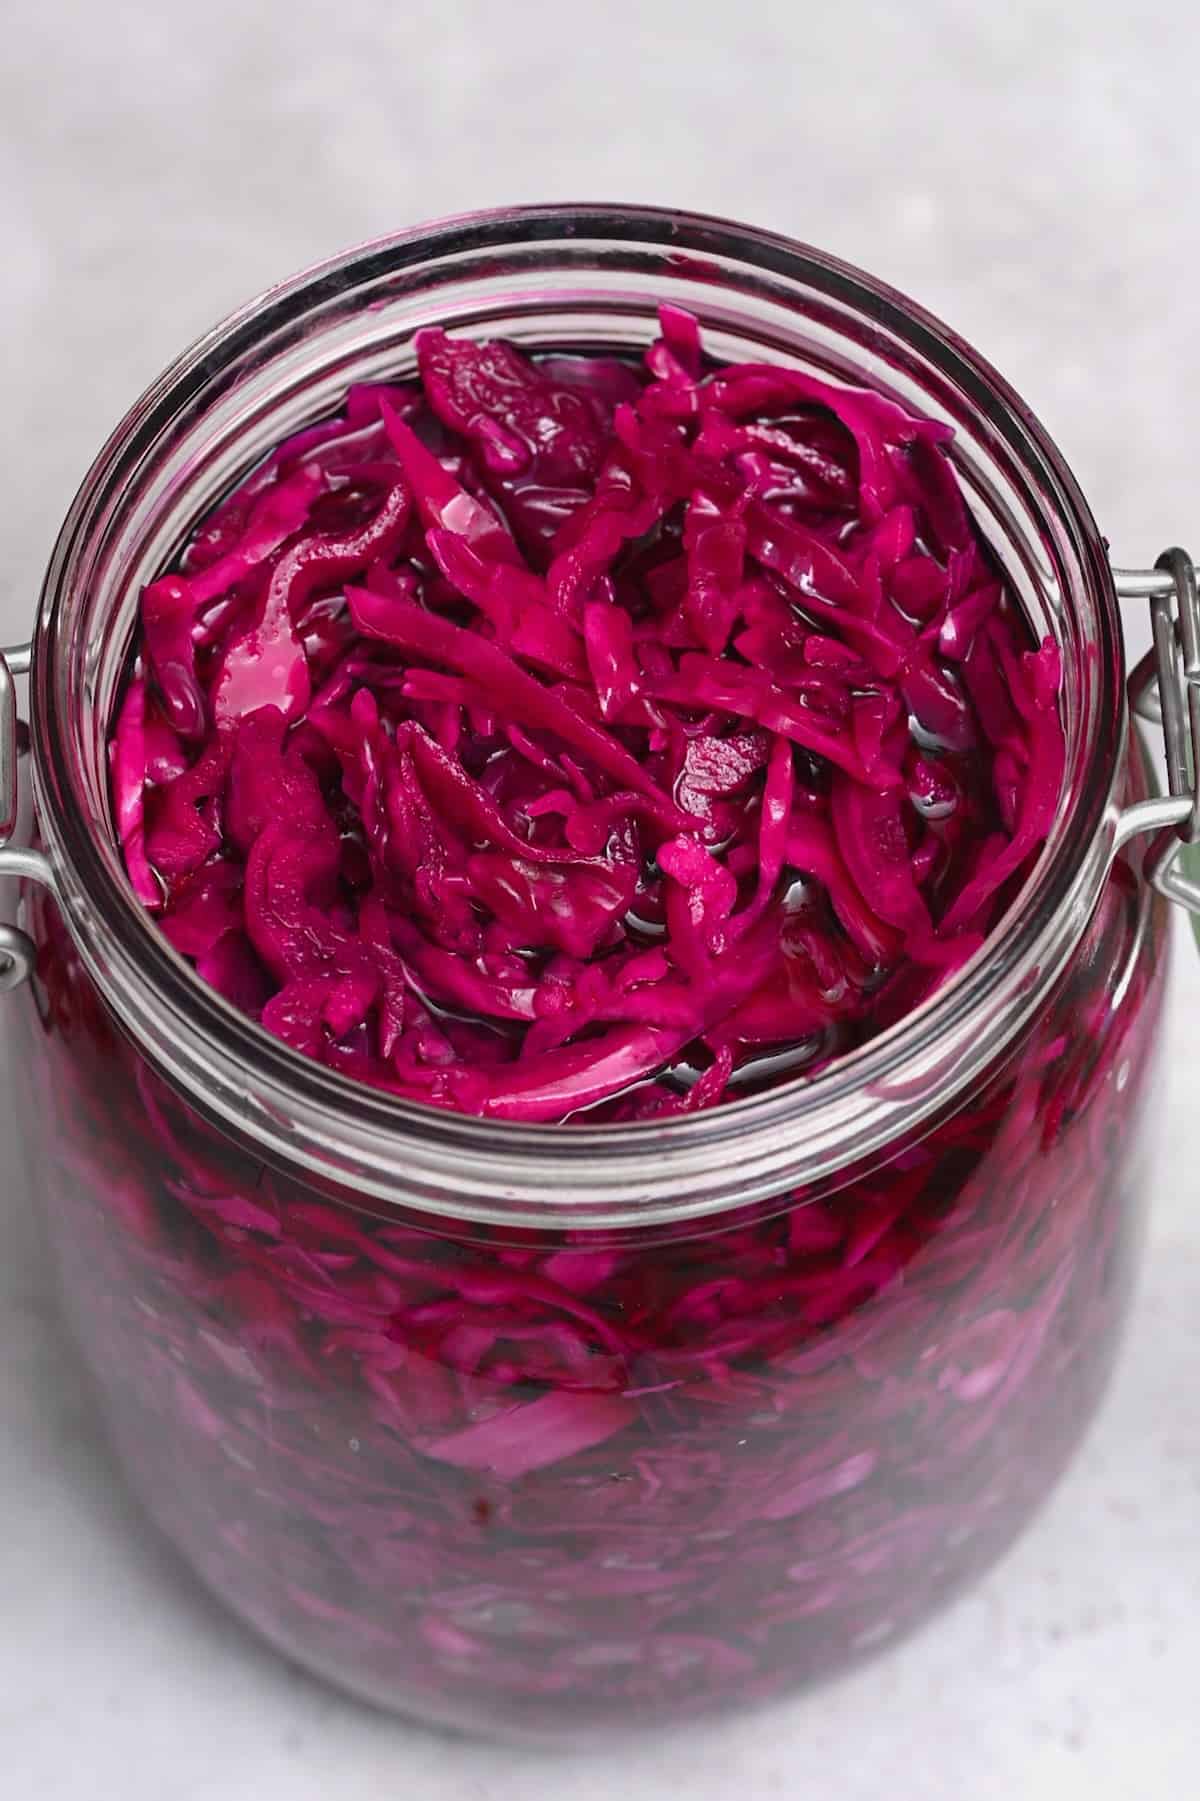 Homemade pickled red cabbage in a jar